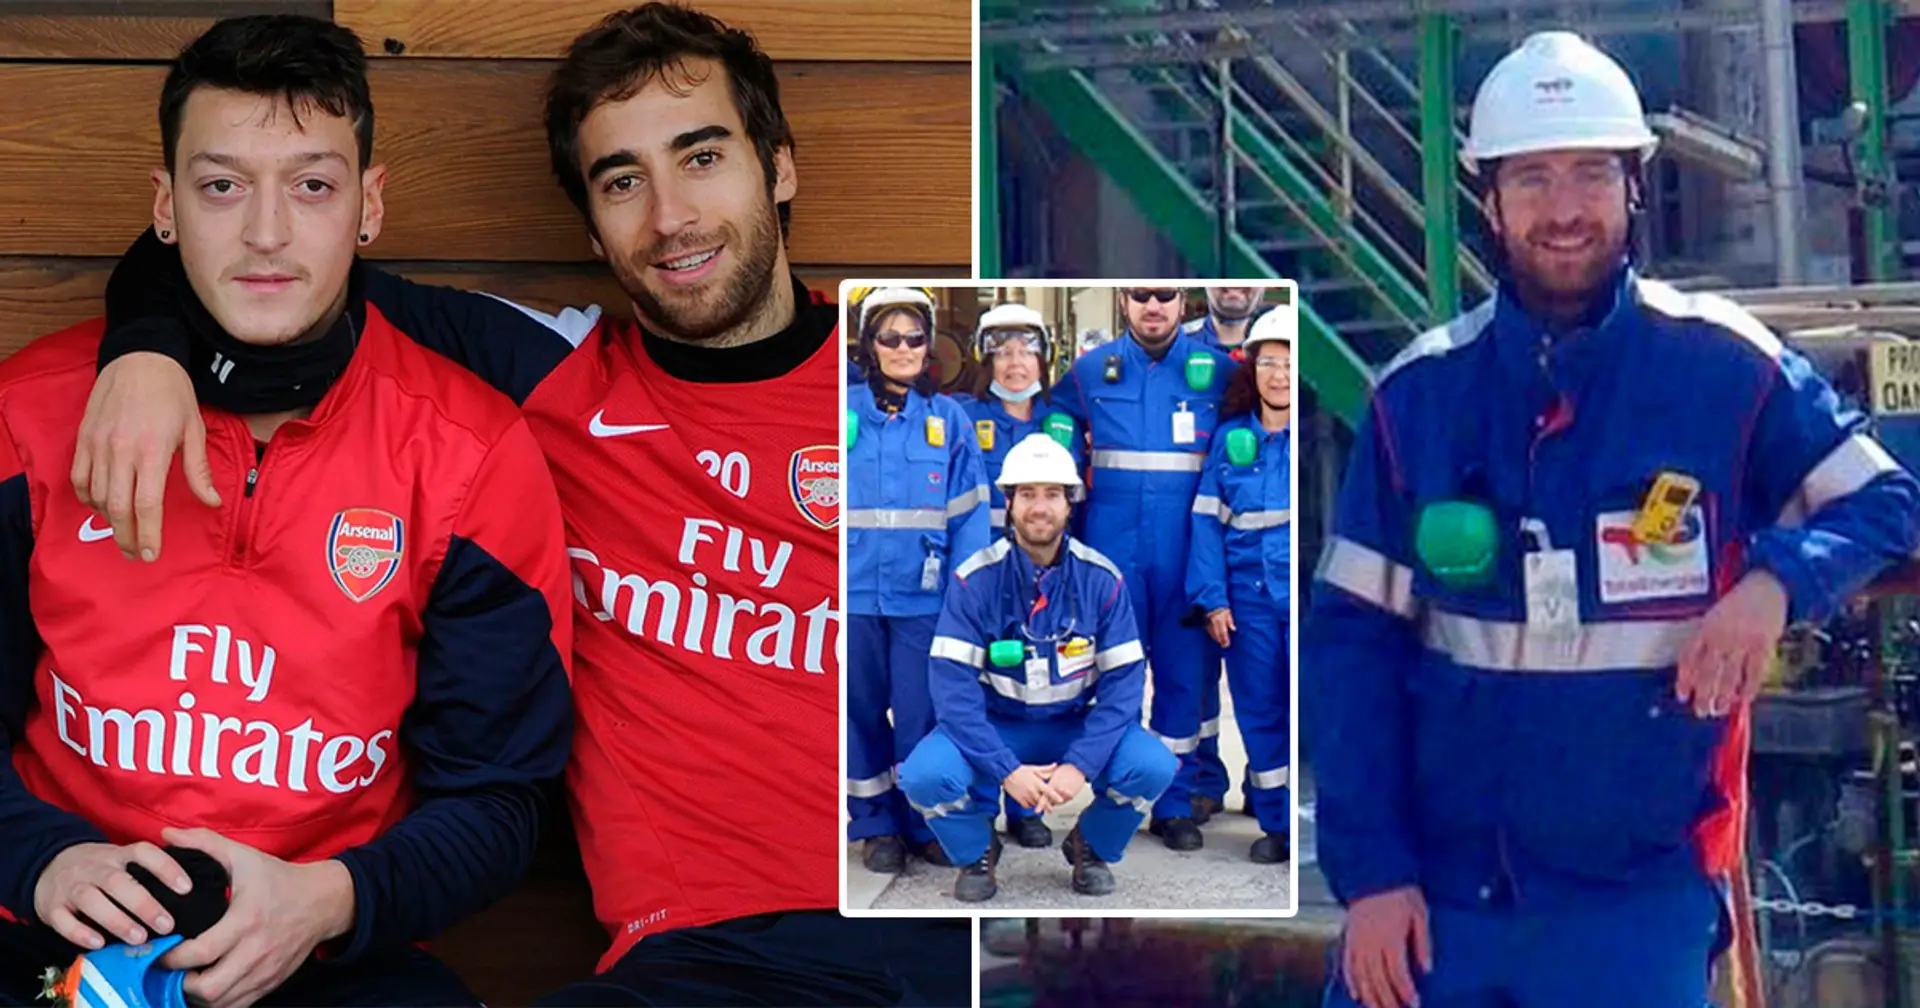 Ex-Arsenal player Mathieu Flamini poses with his new factory which could make billions